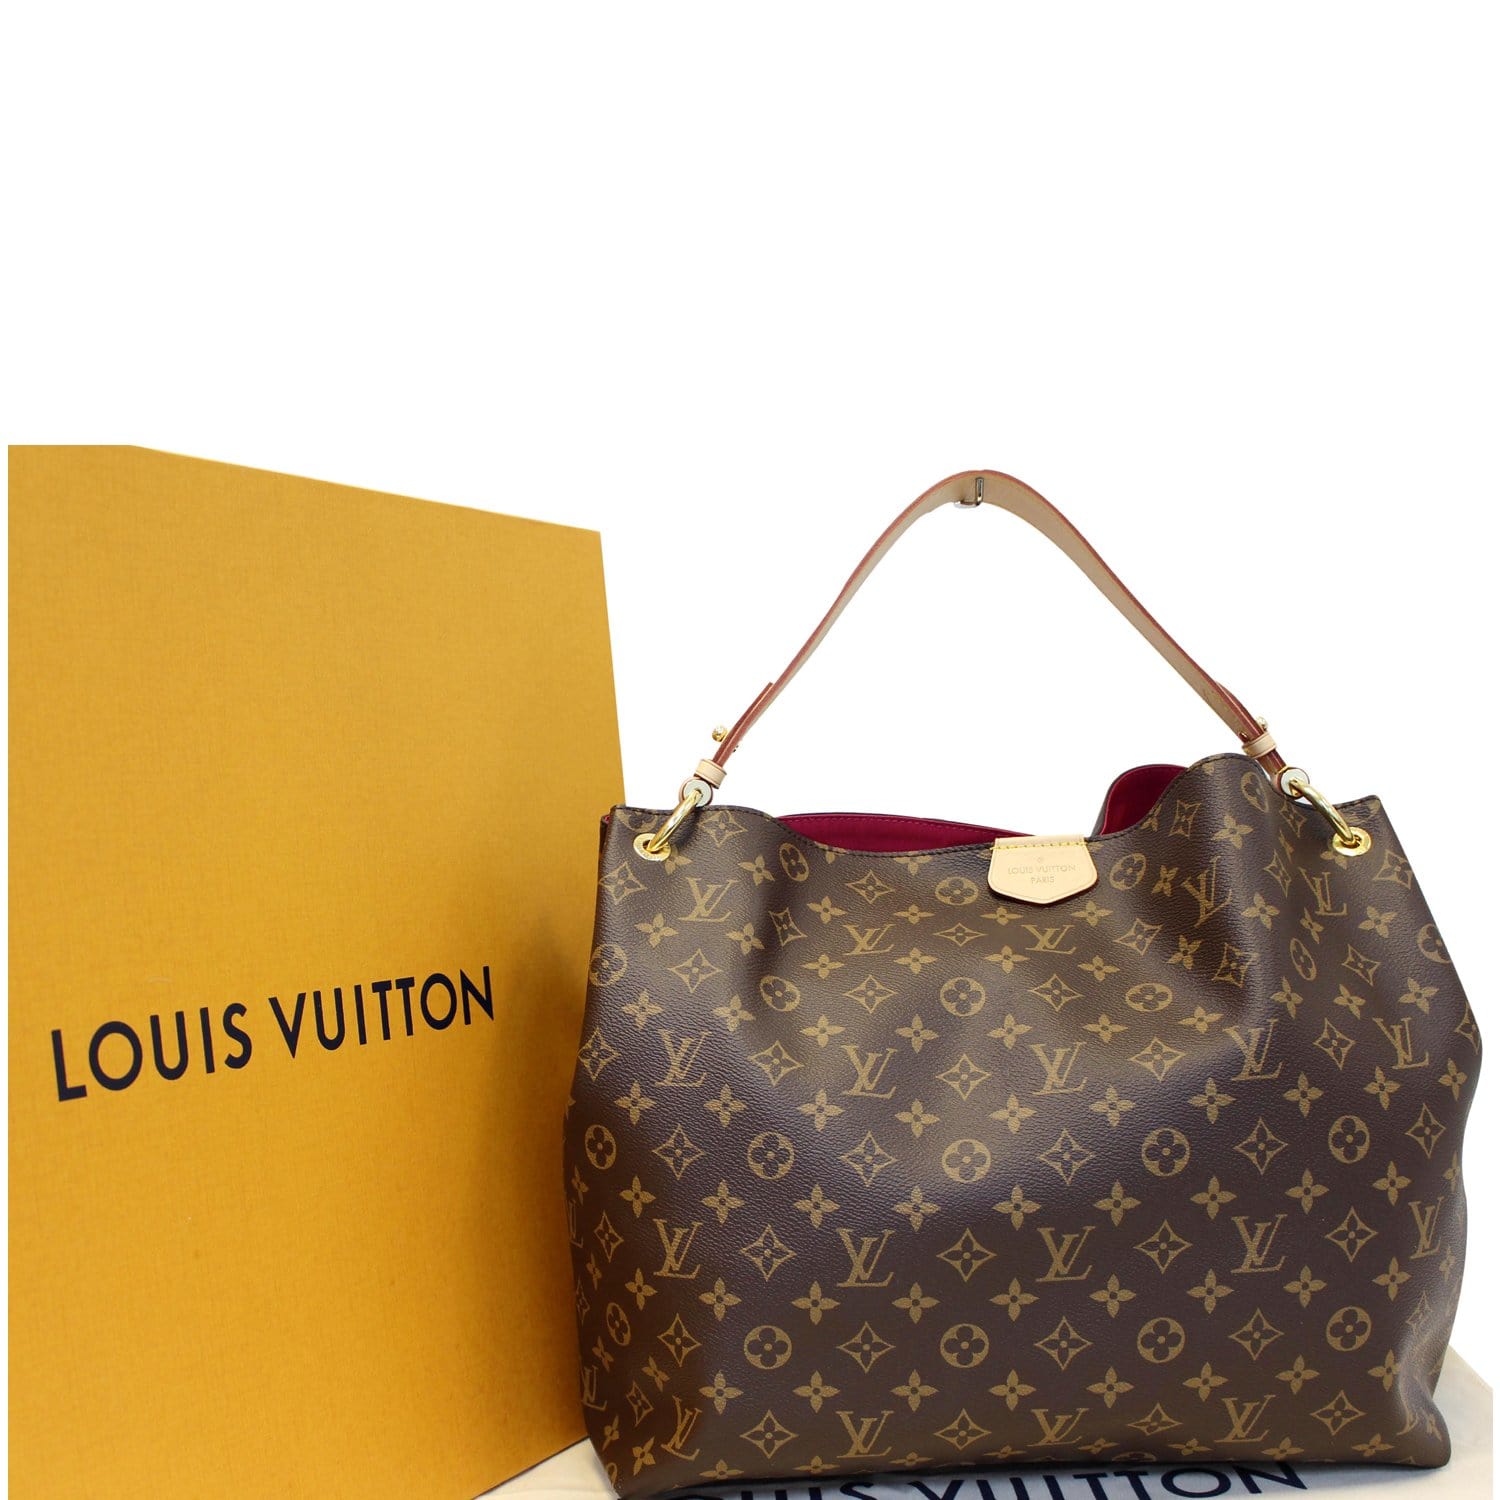 Reviewing my Louis Vuitton Graceful MM 💕 My latest bag in my